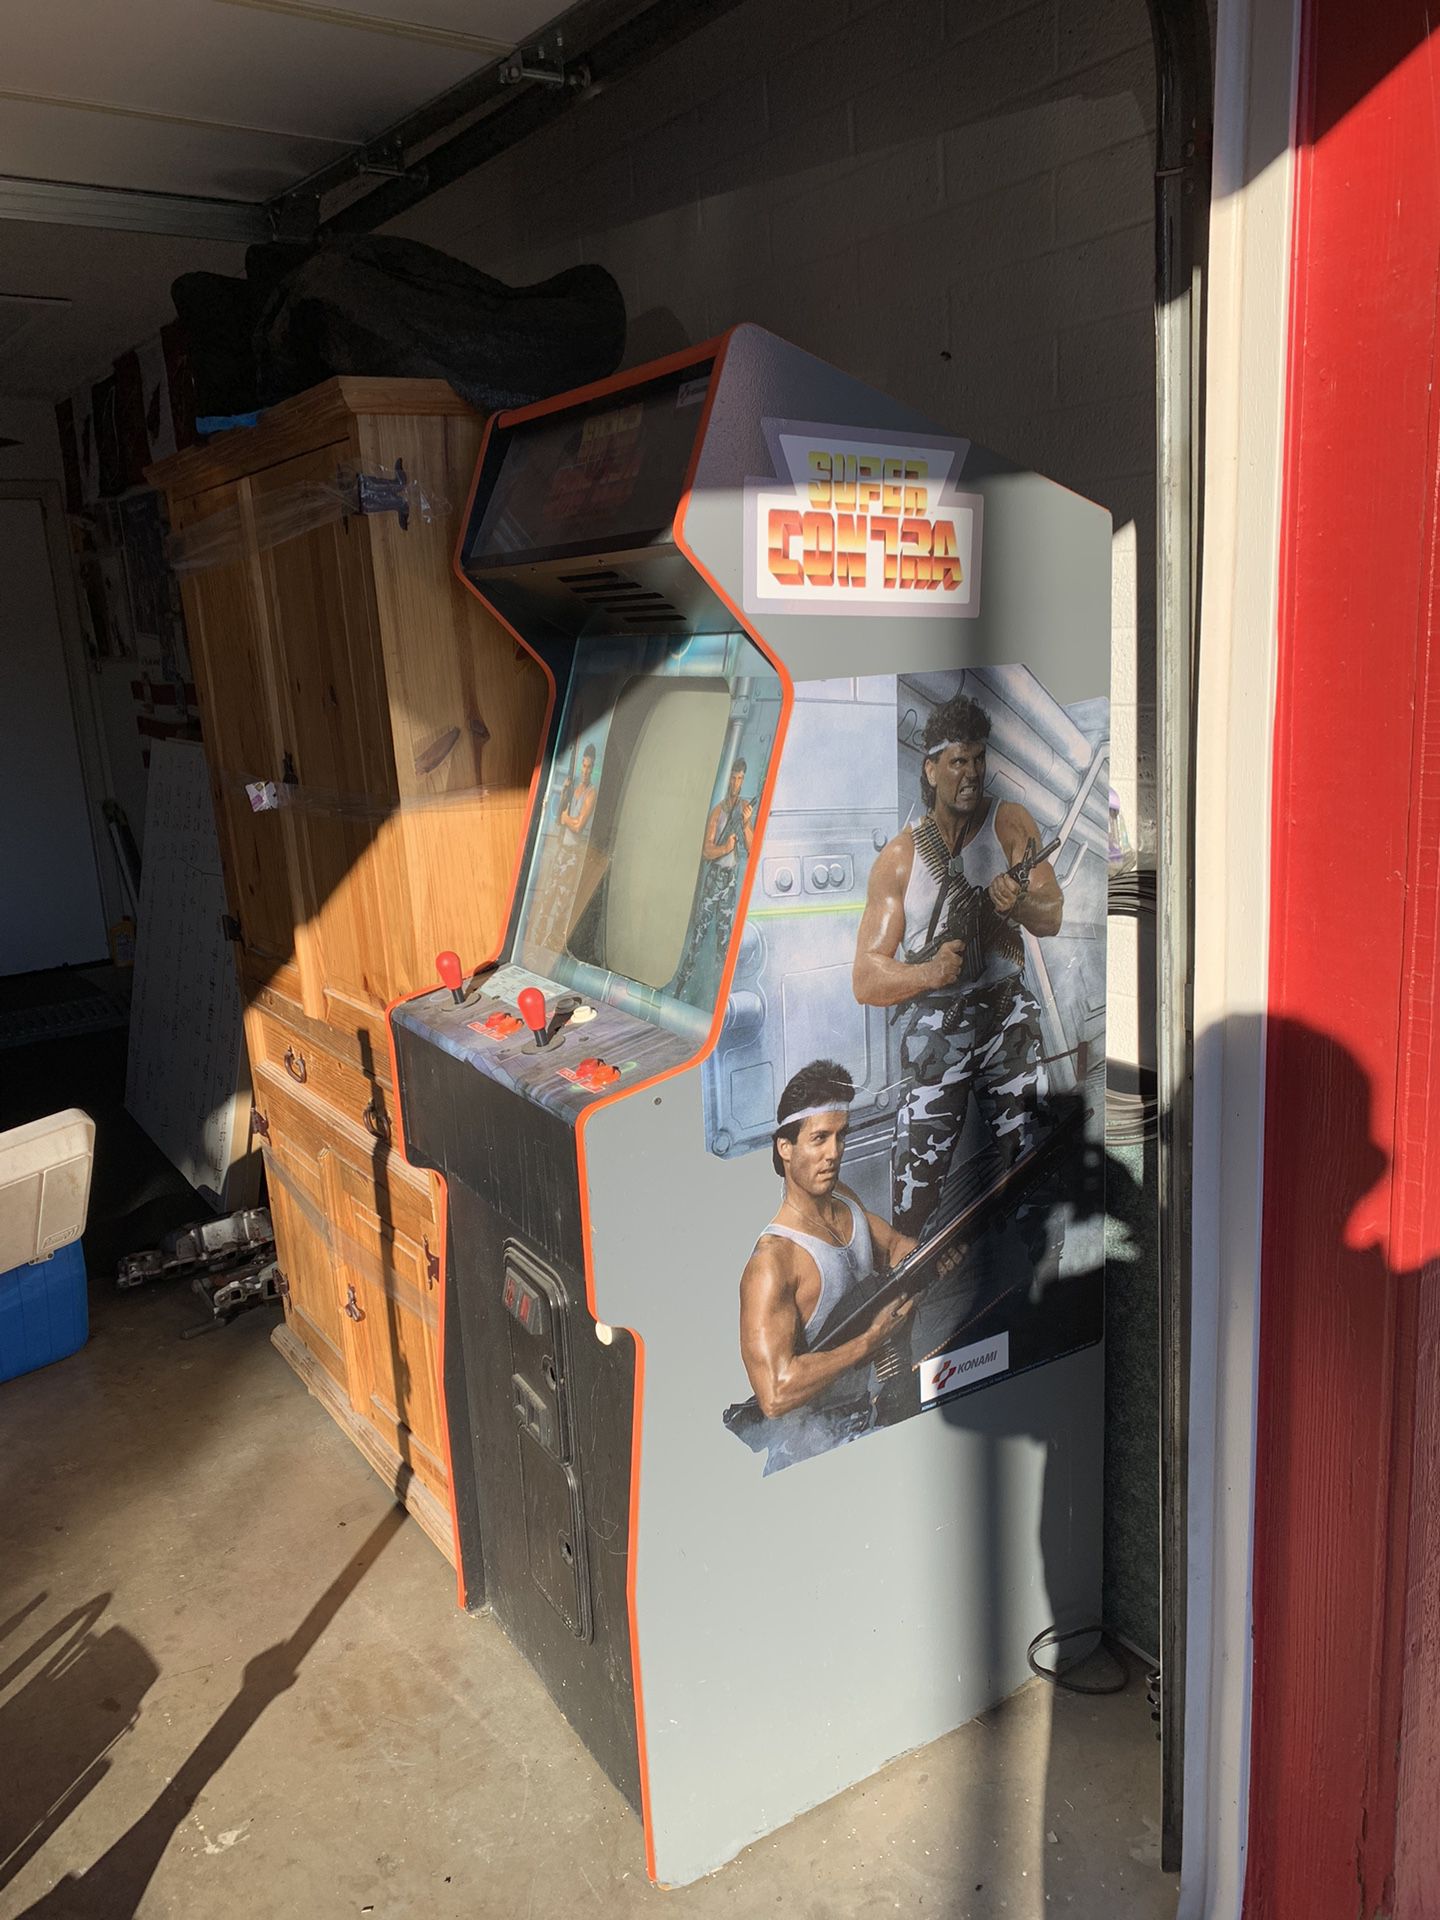 Super Contra Arcade Game, 418 In 1, $600.00 Takes It